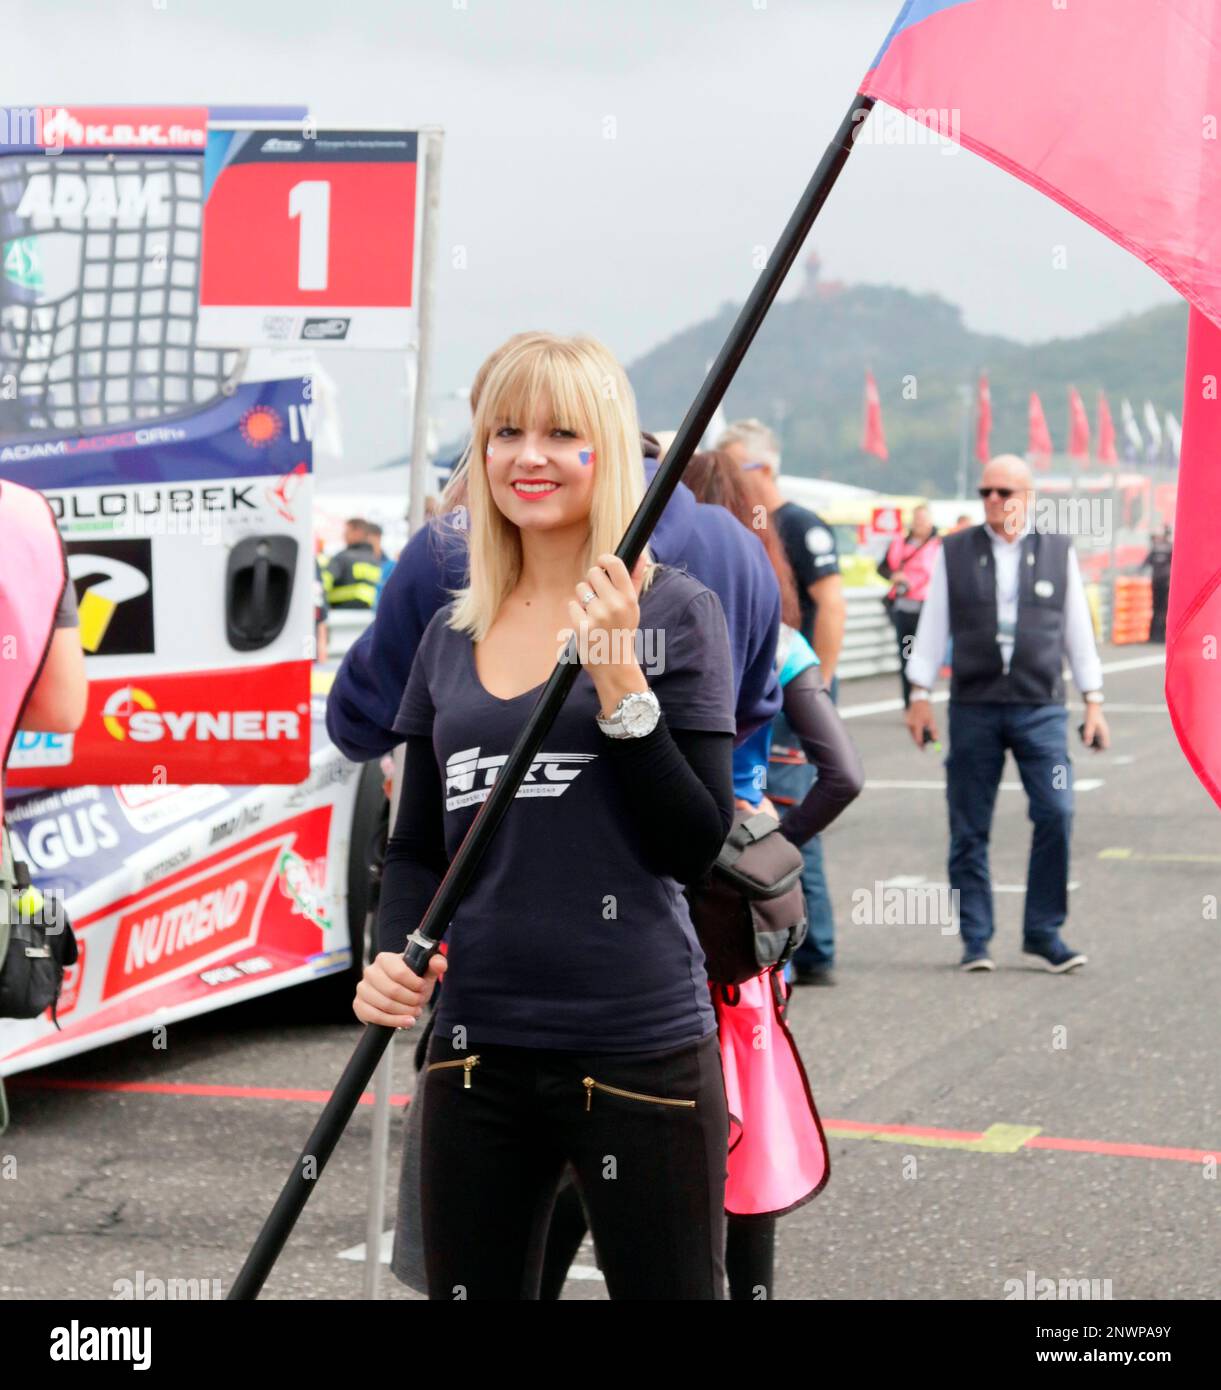 September 2, 2018 - Most, Czechy - third race, Czech grid girl .FIA  European Truck Racing Championship 2018, 5th race weekend, Autodrom  Most,September 01, 2018, .in the5th of 8 racing weekends in